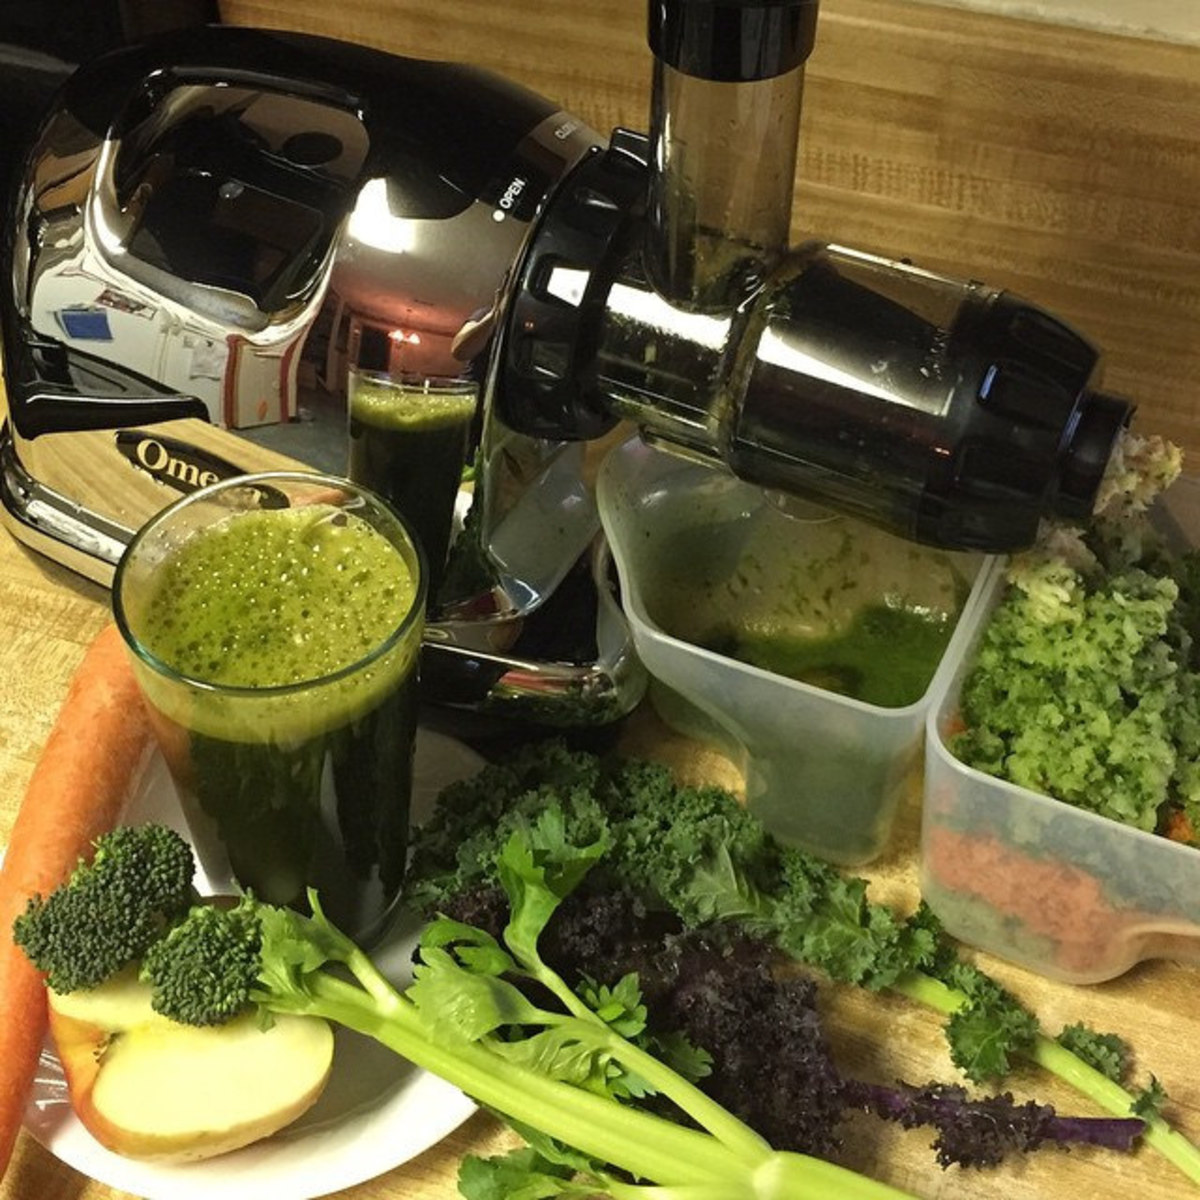 Notice that a juicer or blender can handle apples, kale, and celery.